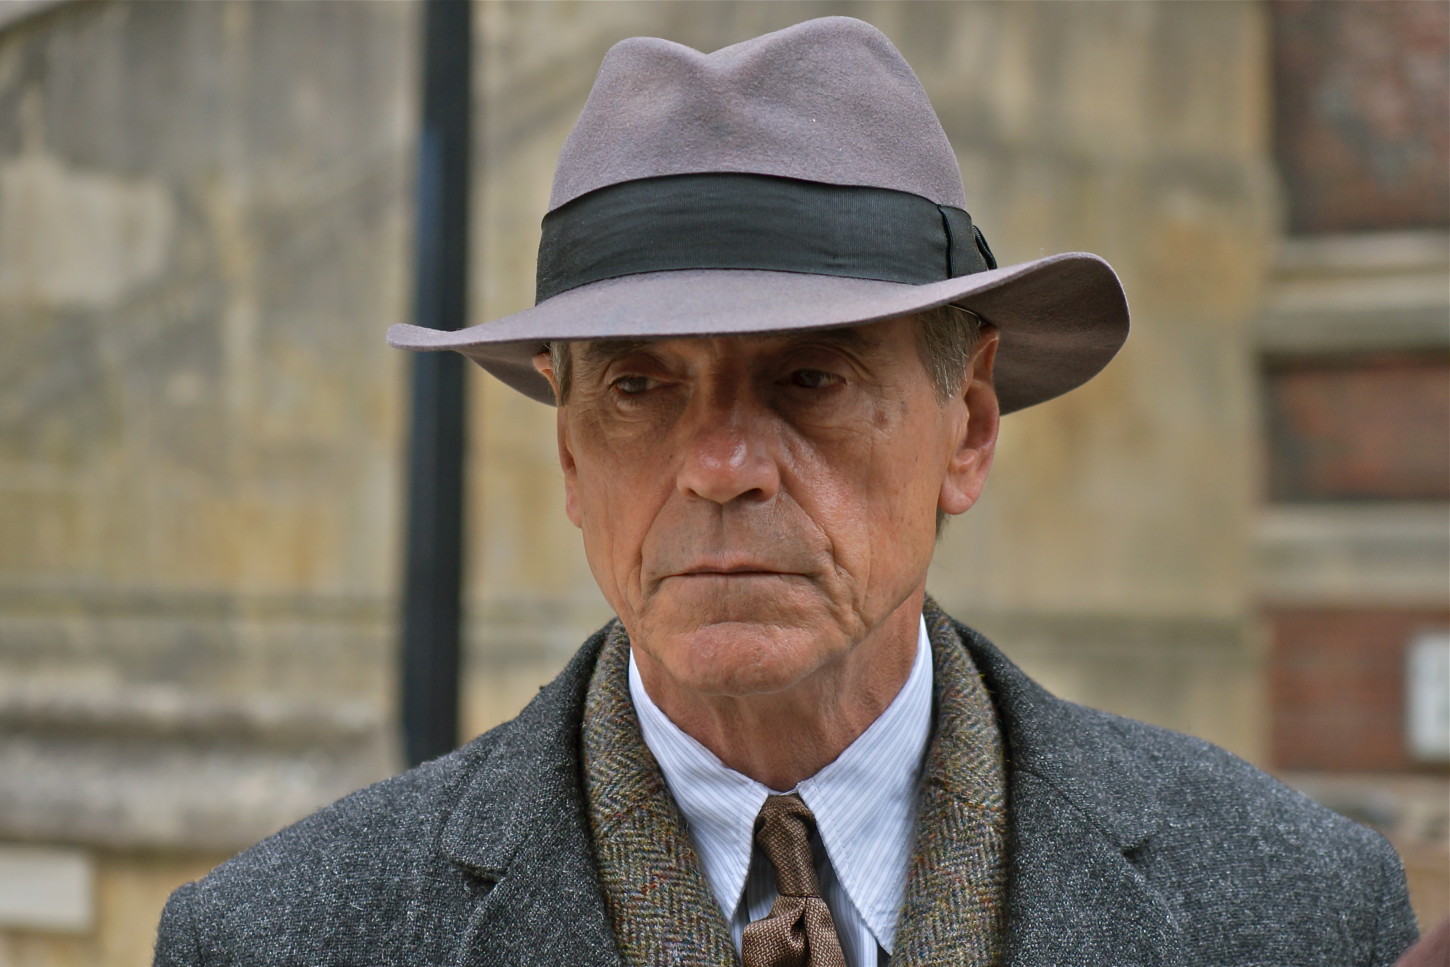 Jeremy Irons in "The Man Who Knew Infinity"